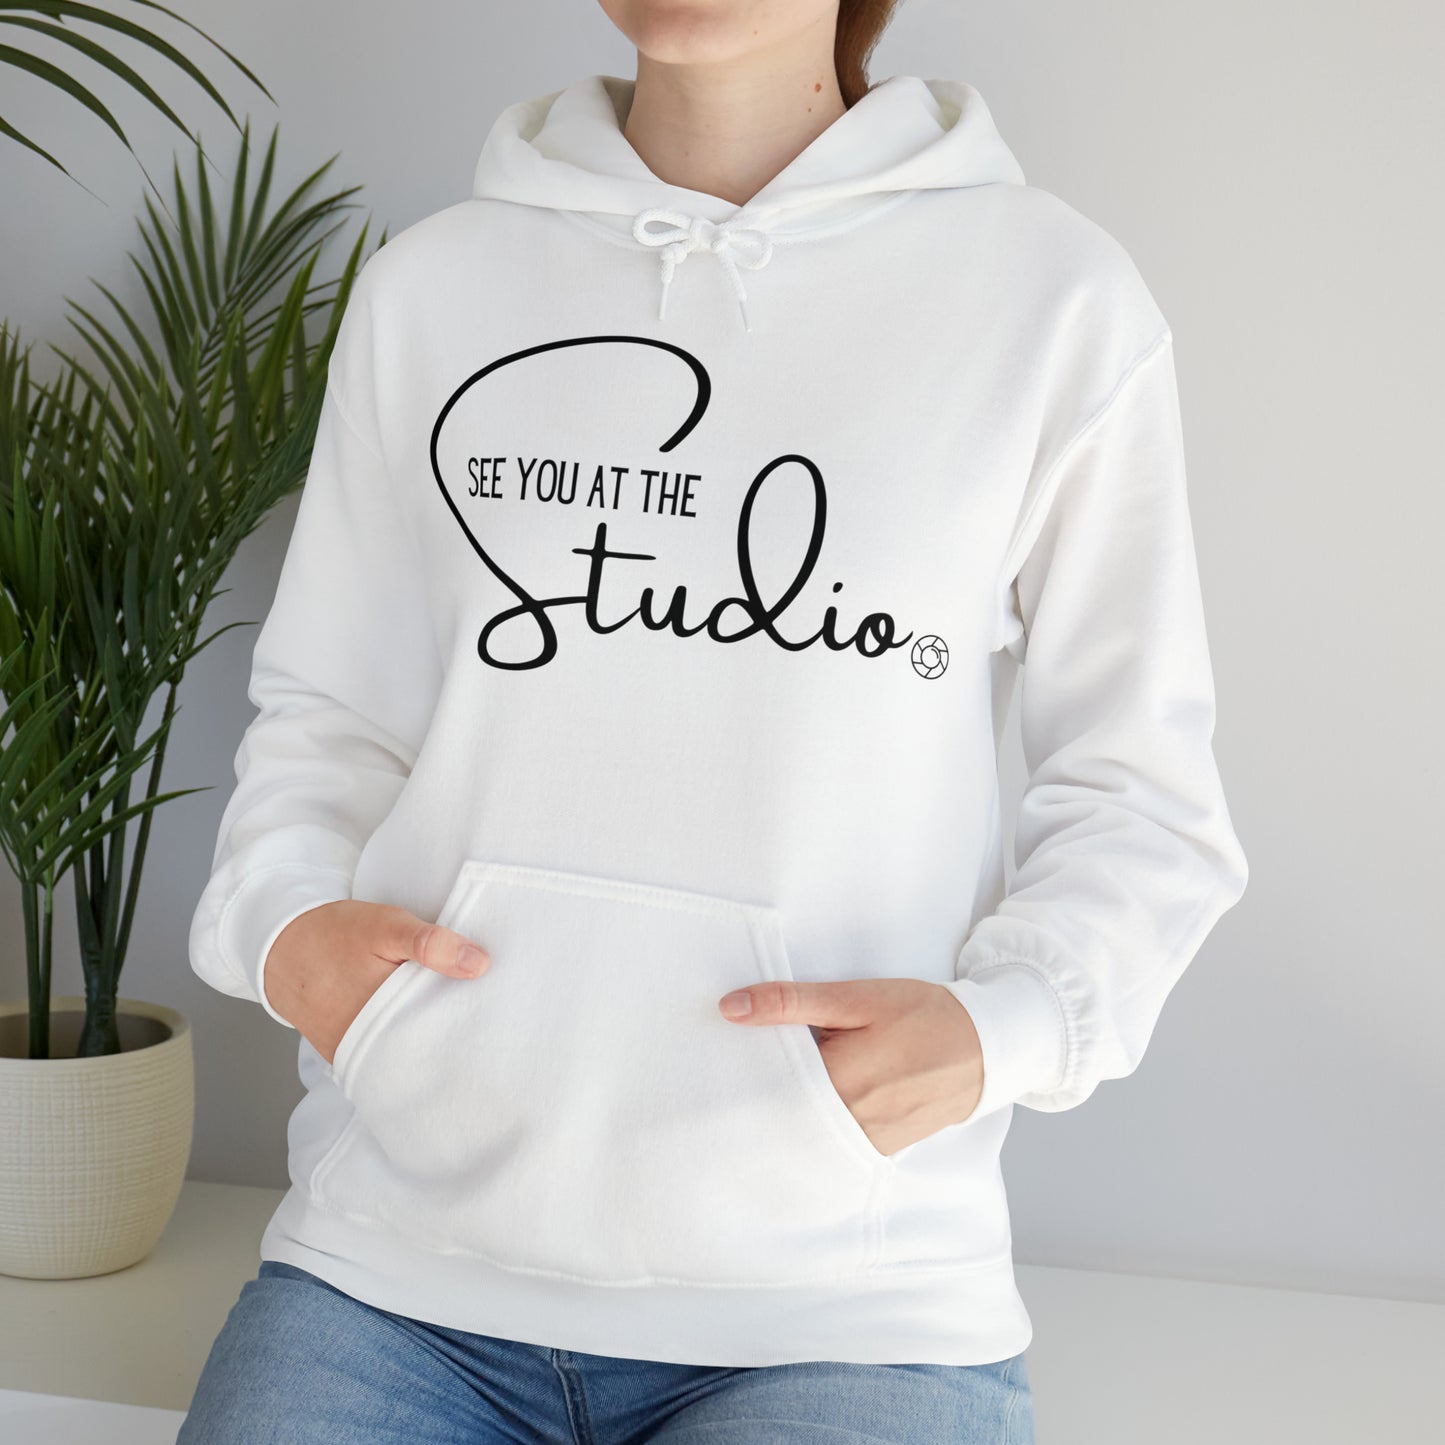 See you at the Studio (Blk) - Heavy Blend™ Hooded Sweatshirt